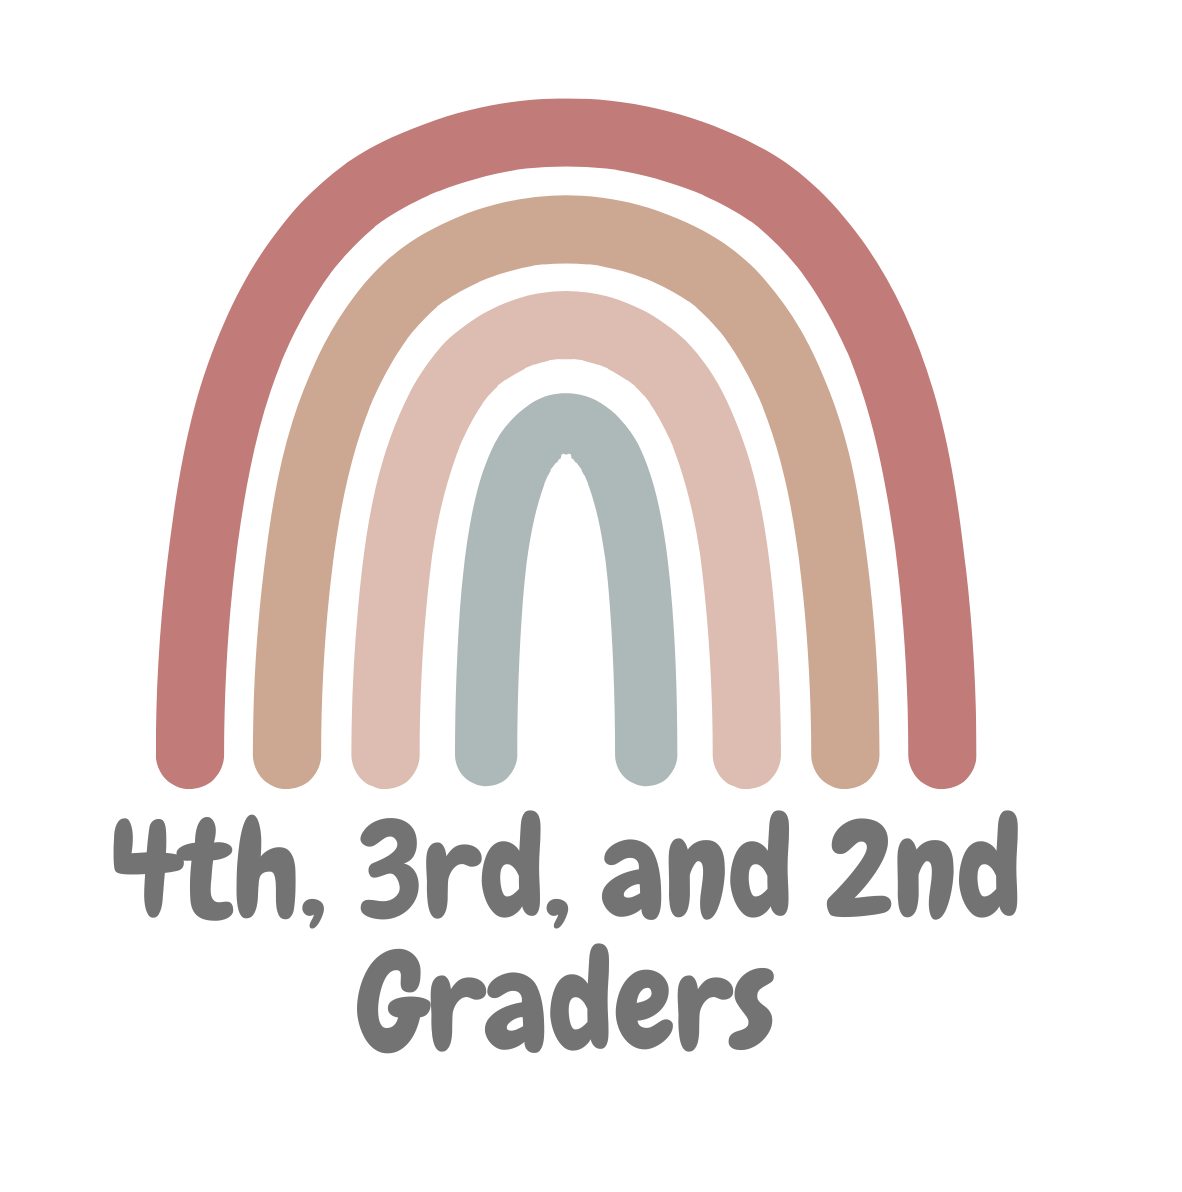 4th, 3rd, and 2nd Graders